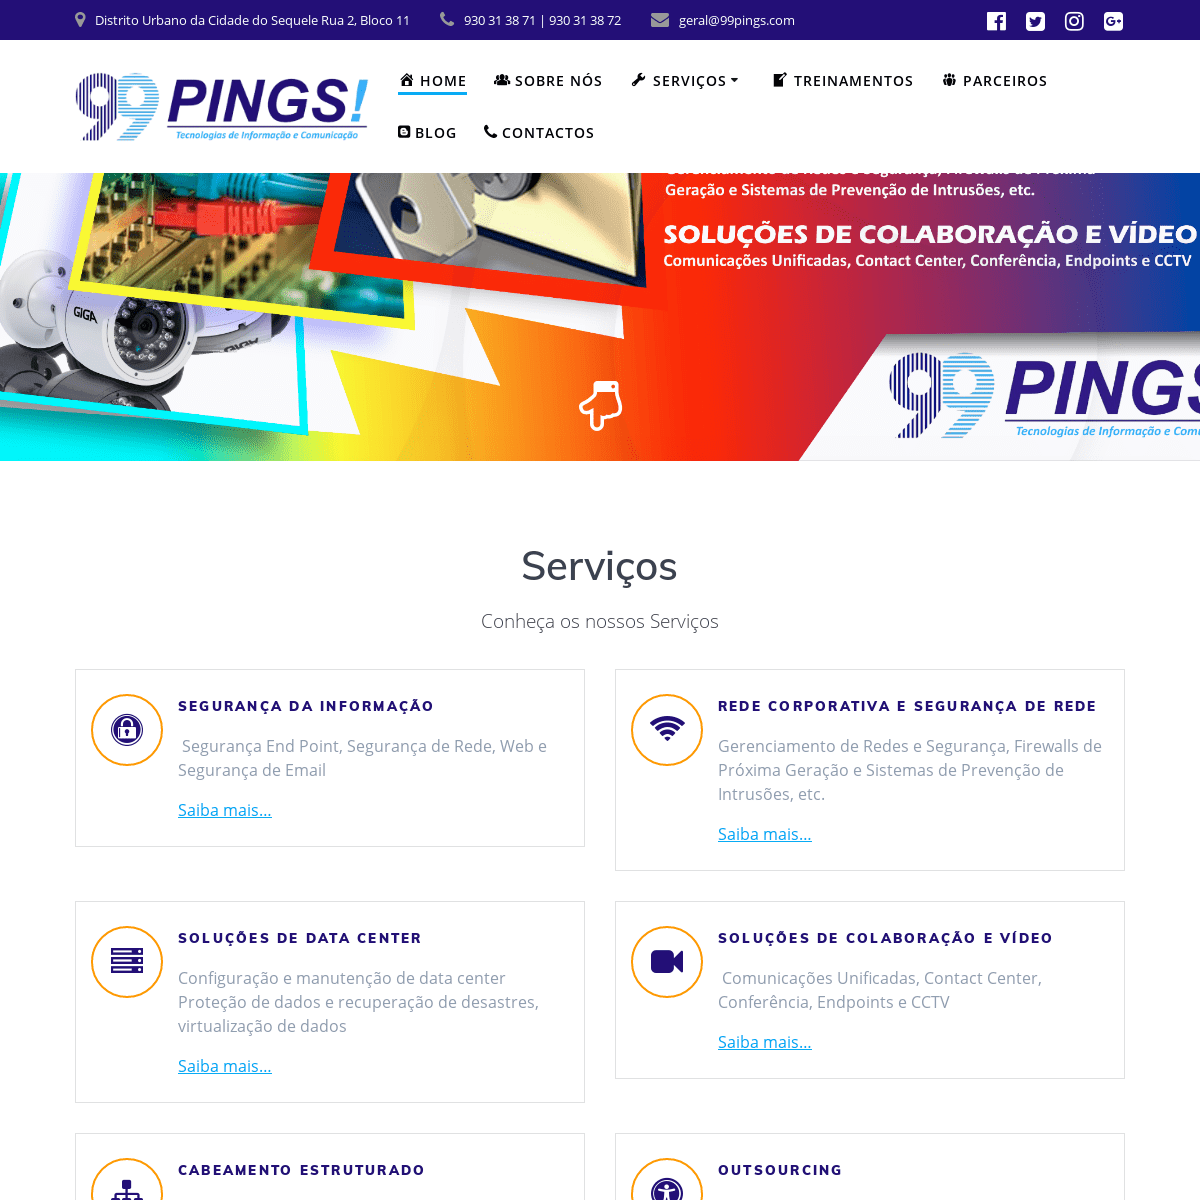 A complete backup of 99pings.com